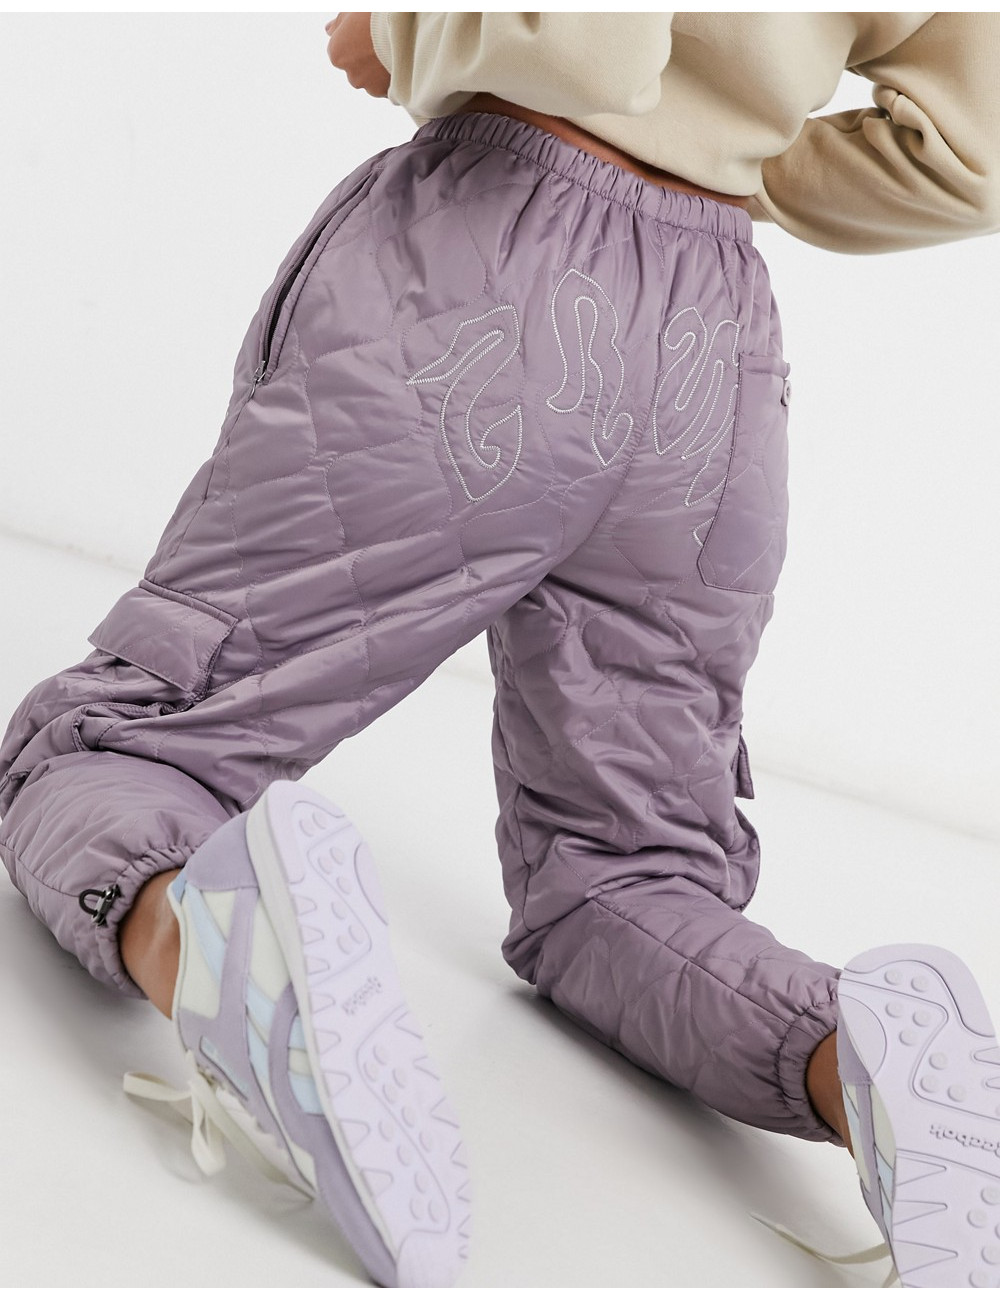 Grimey quilted sweat pants...